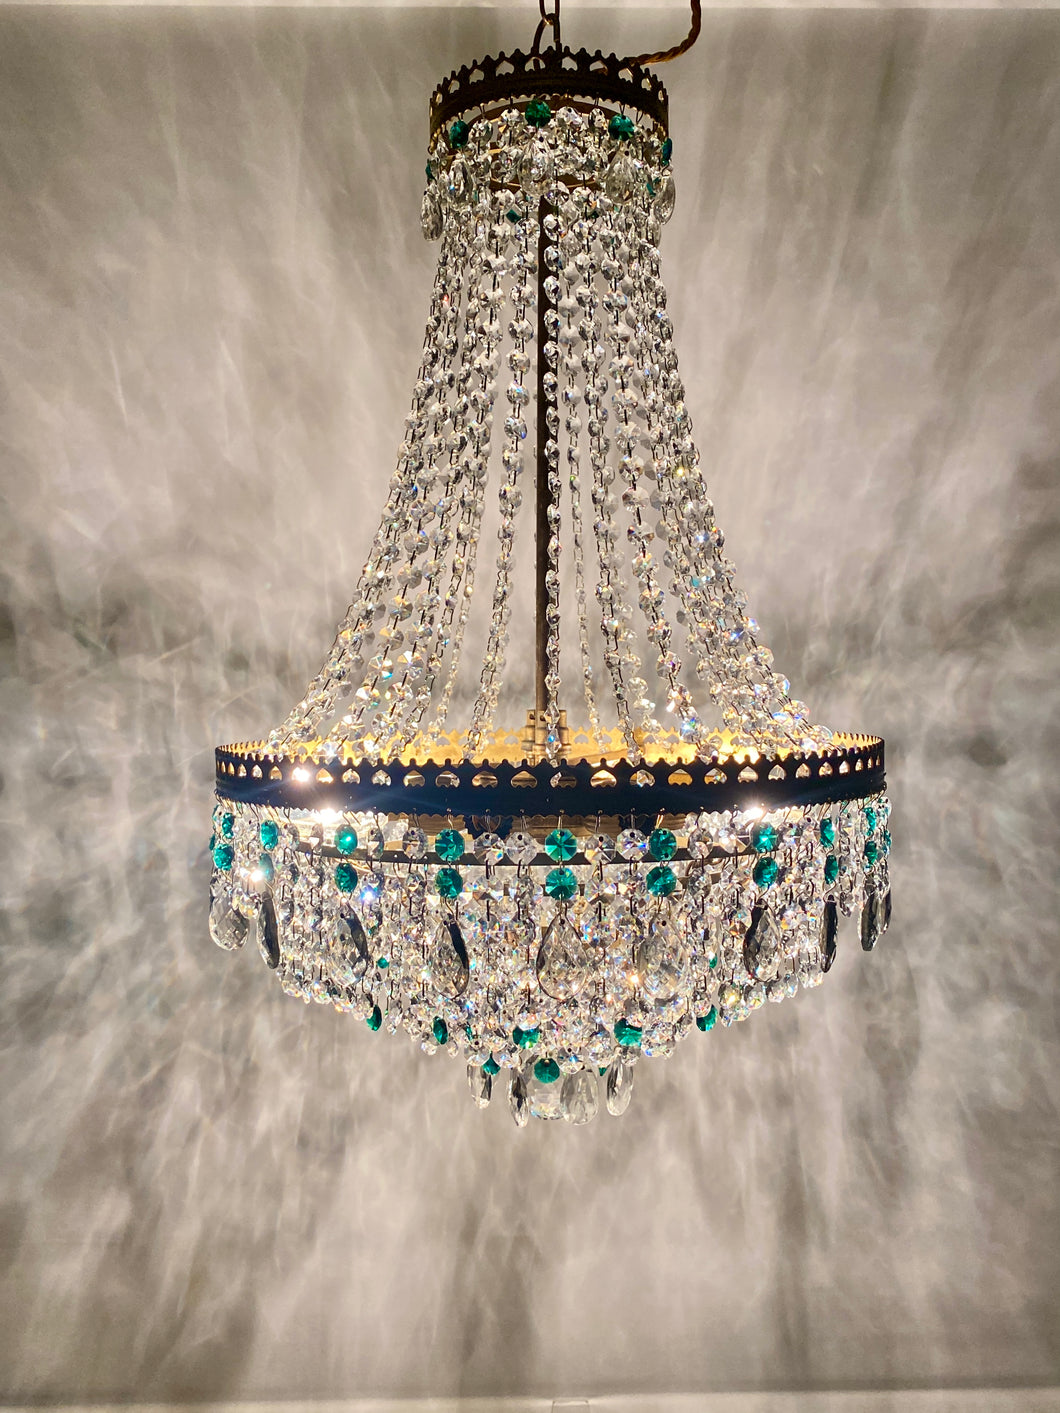 Vintage tent chandelier with an abundance of emerald green, smokey pear drops & clear octagon crystals